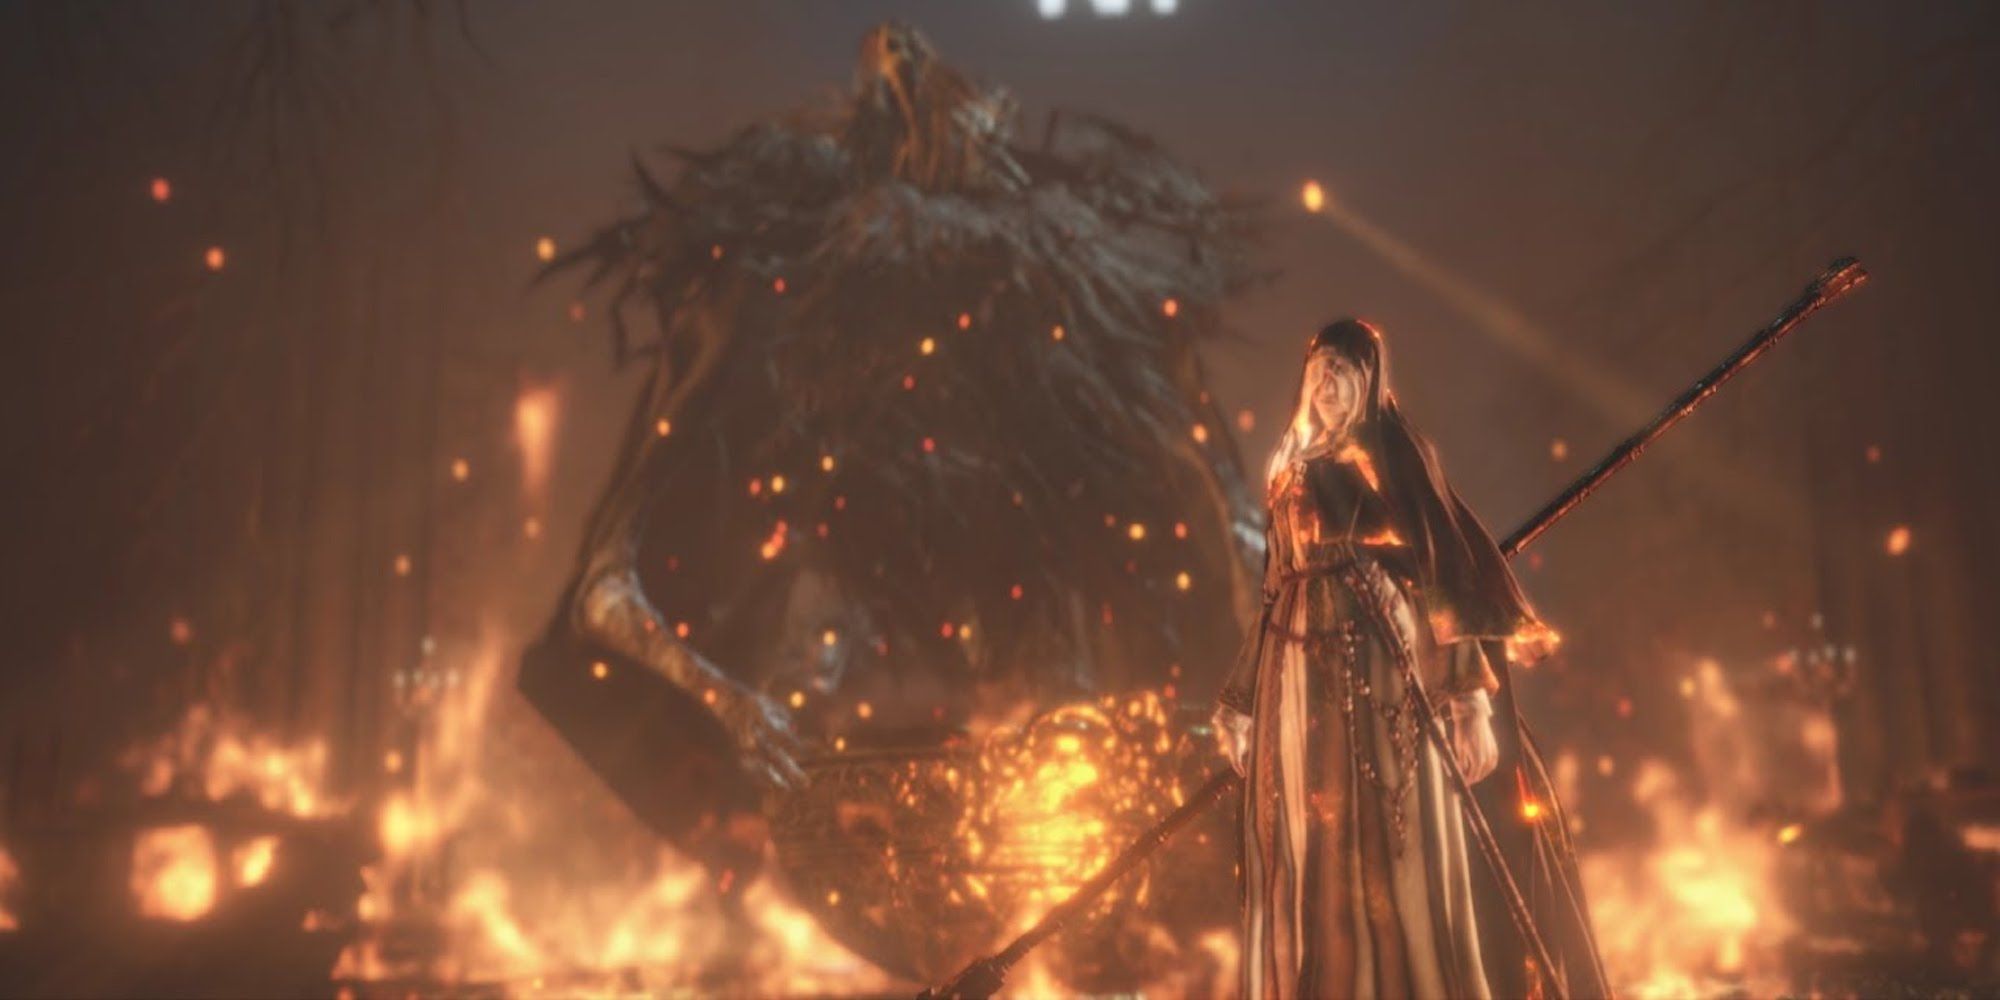 Sister Friede and her father standing behind her (Dark Souls 3)